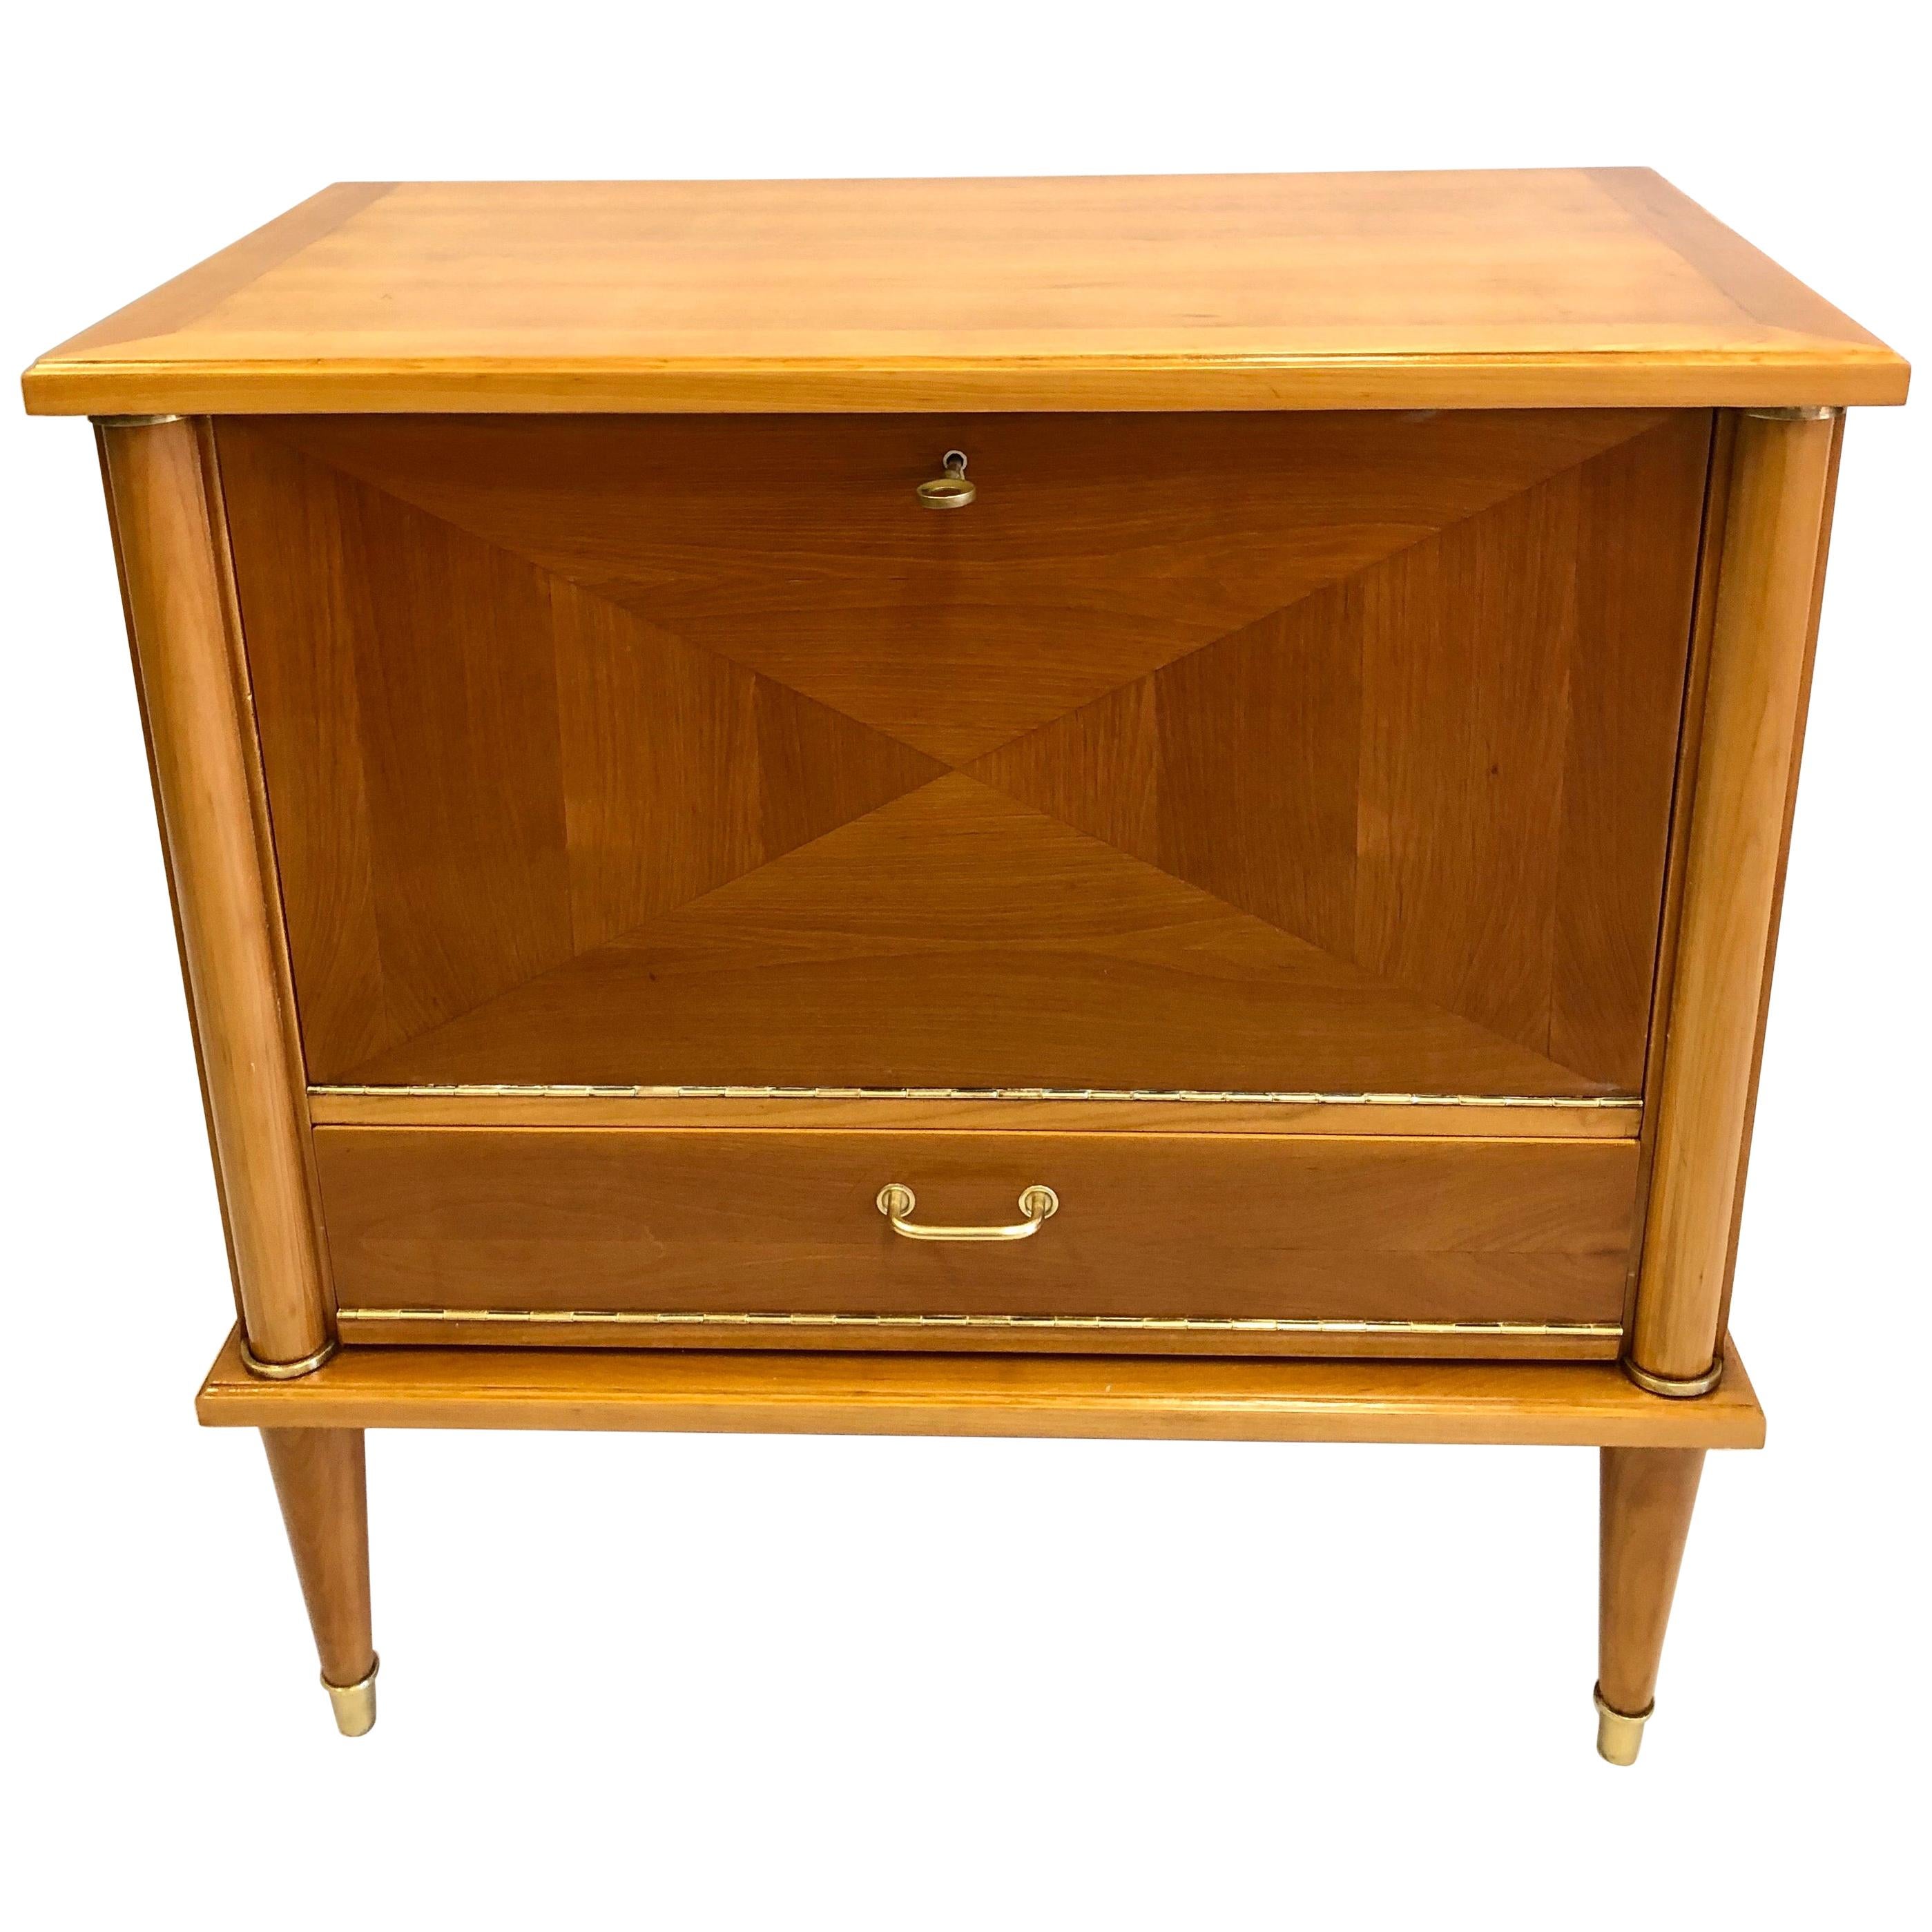 French Modern Neoclassical Cherry Inlay Sideboard/ Console/ Bar by Andre Arbus